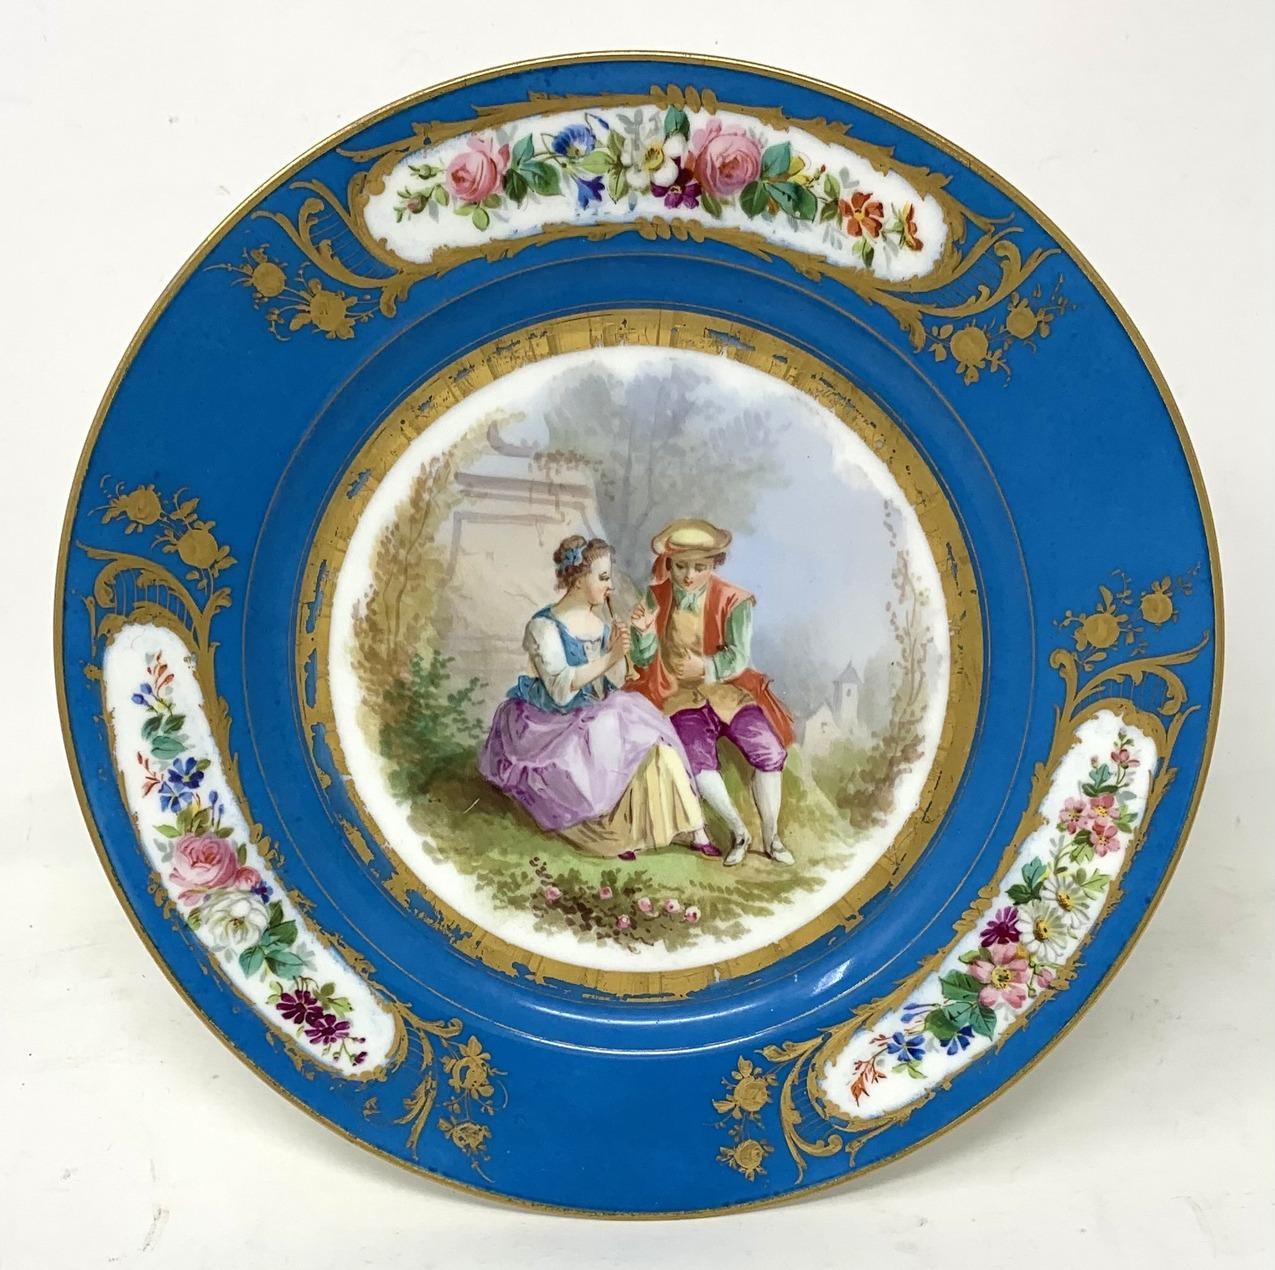 Antique Pair French Sevres Hand Painted Celeste Blue Circular Cabinet Plates 19C In Good Condition For Sale In Dublin, Ireland